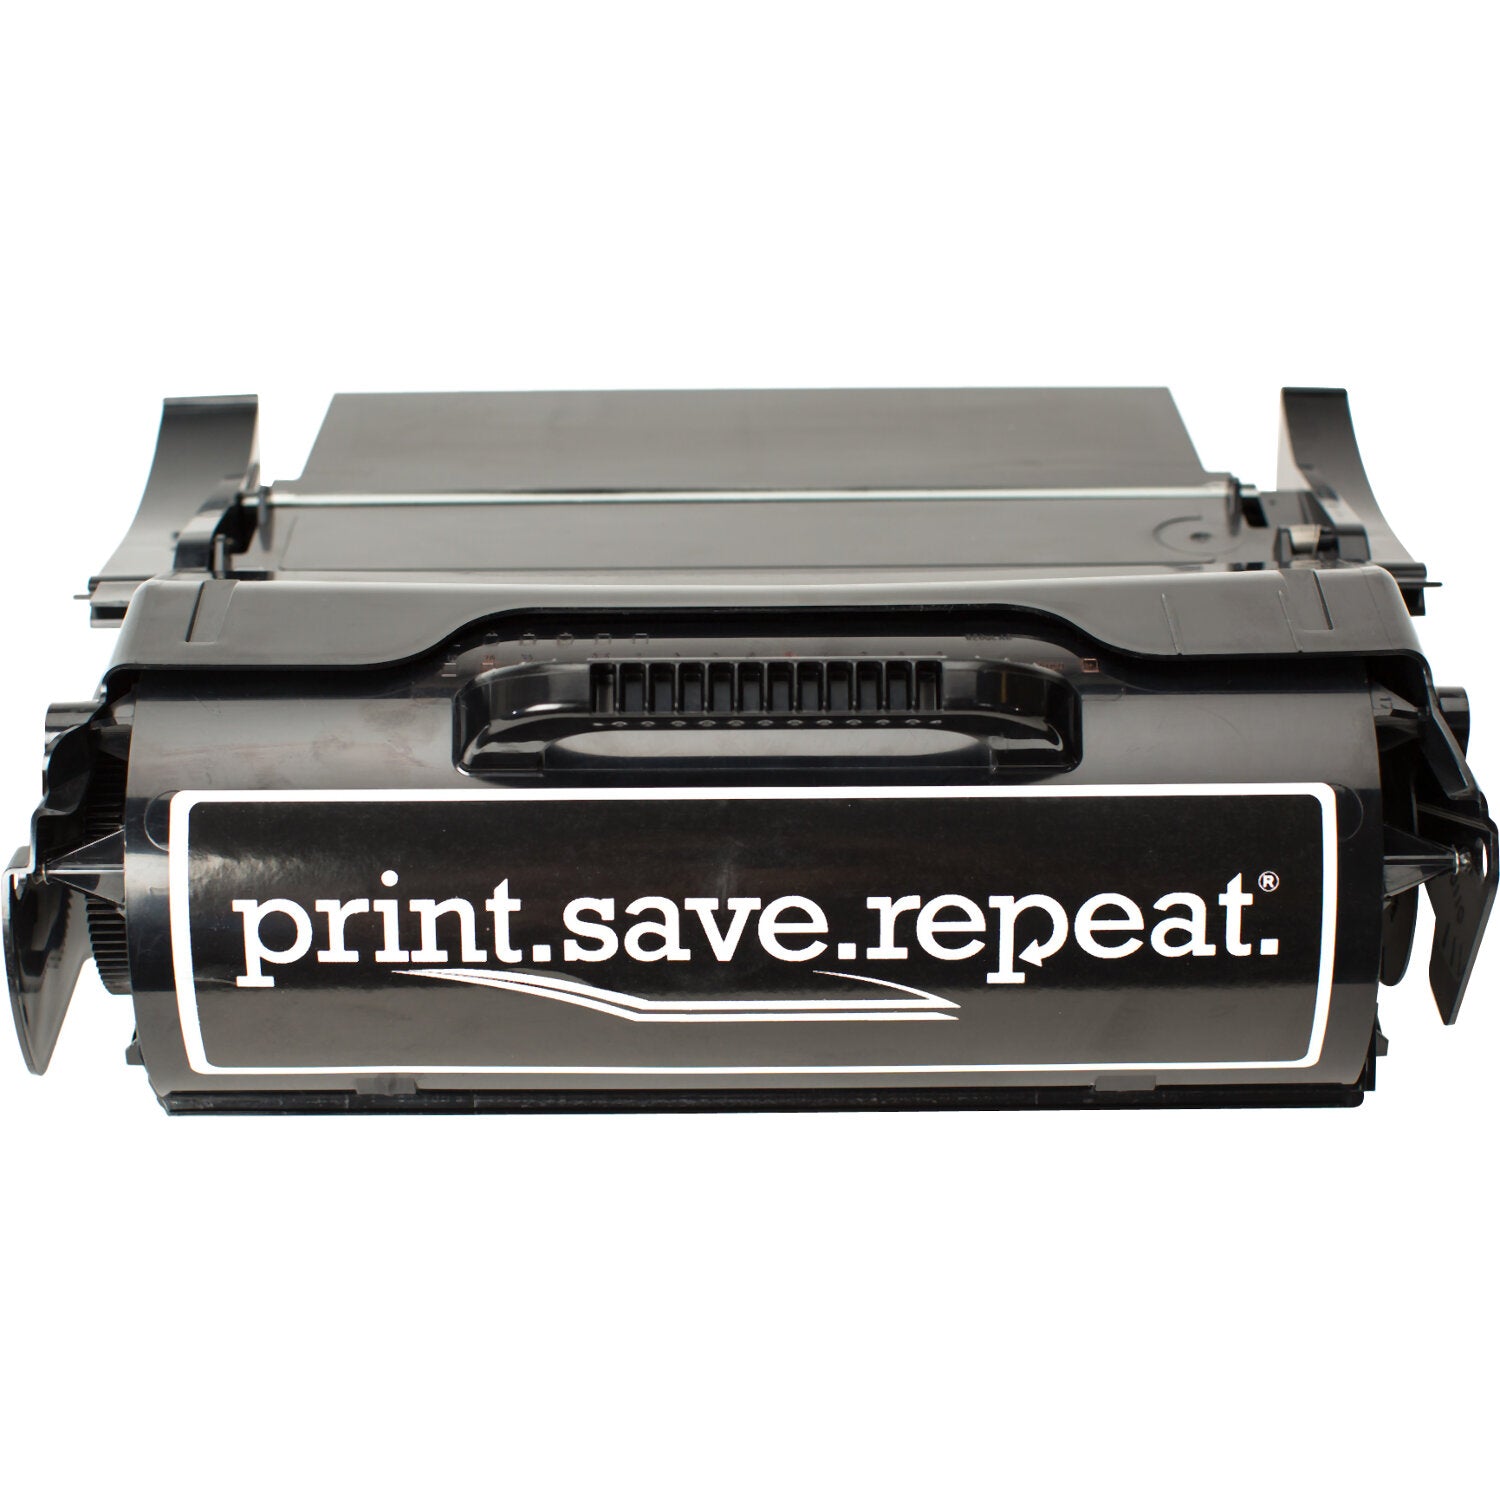 Print.Save.Repeat. Dell F362T High Yield Remanufactured Toner Cartridge for 5230, 5350 [21,000 Pages]